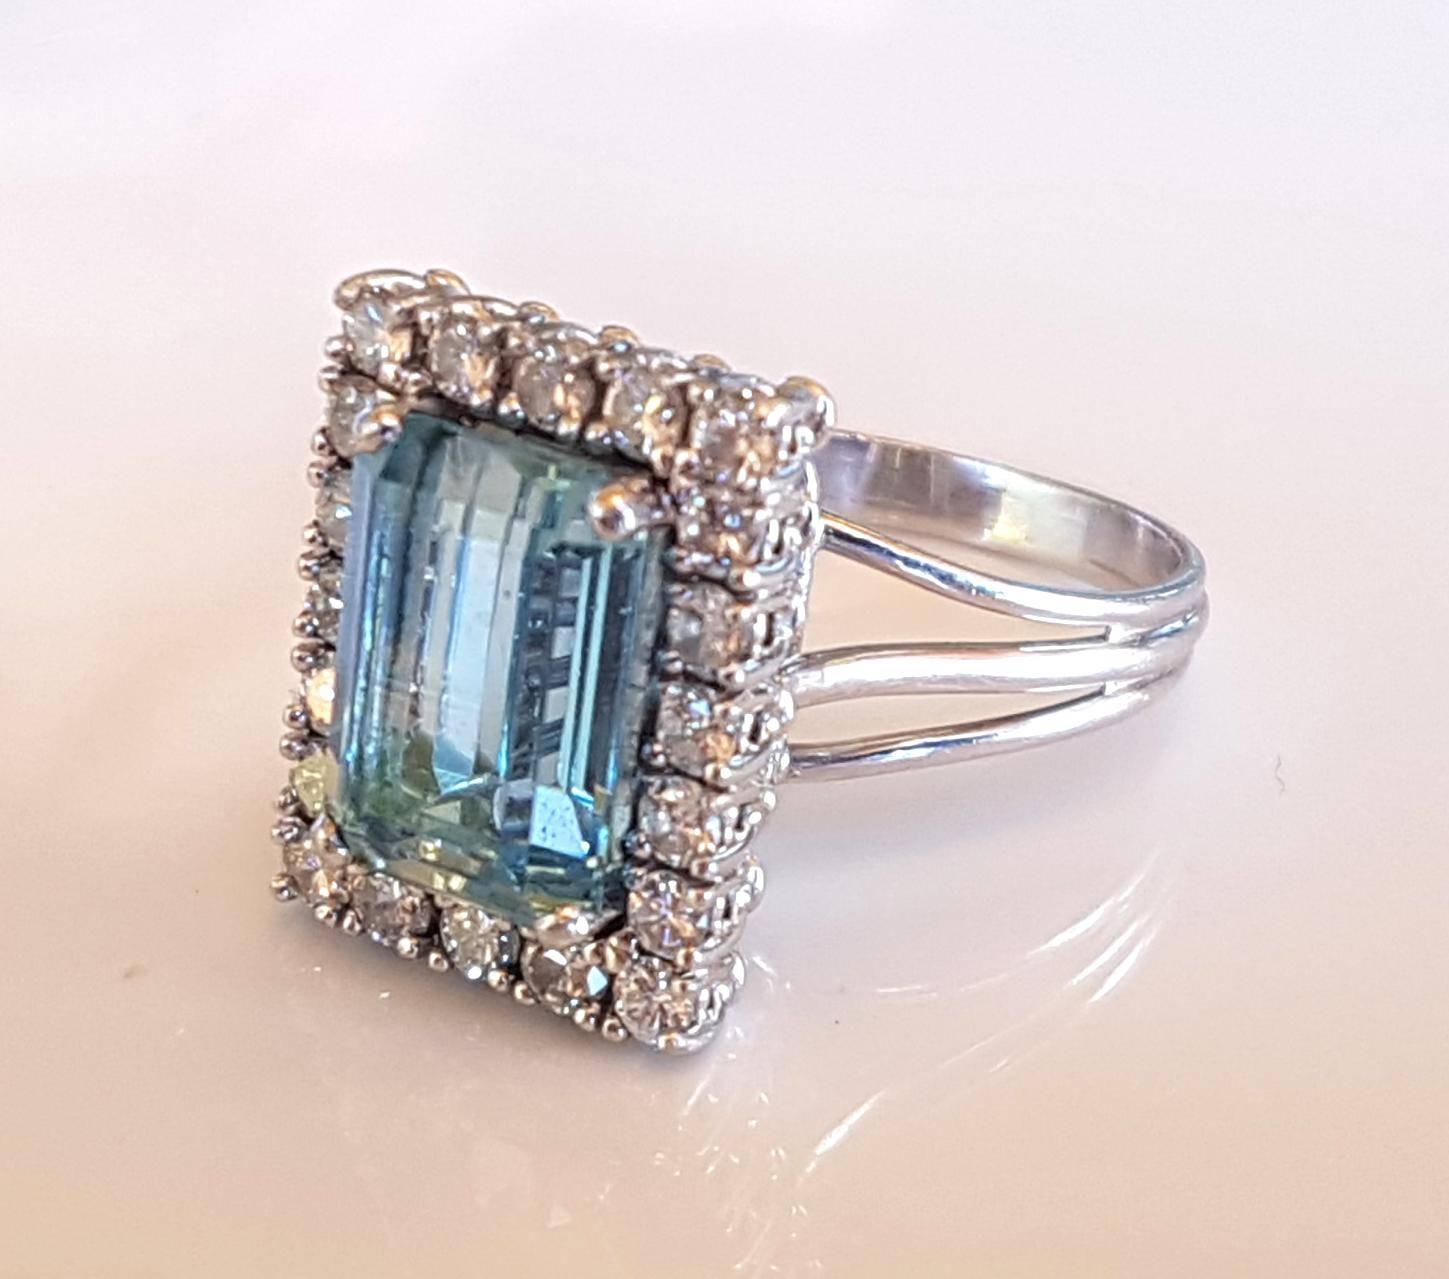 Big and bold, this 18ct white gold aquamarine and diamond dress ring is platinum set with a medium light blue emerald cut aqua of 3.35ct surrounded by 20 round brilliant cut diamonds of total weight 0.95ct G-H VS-SI.  Wire basket underrail and